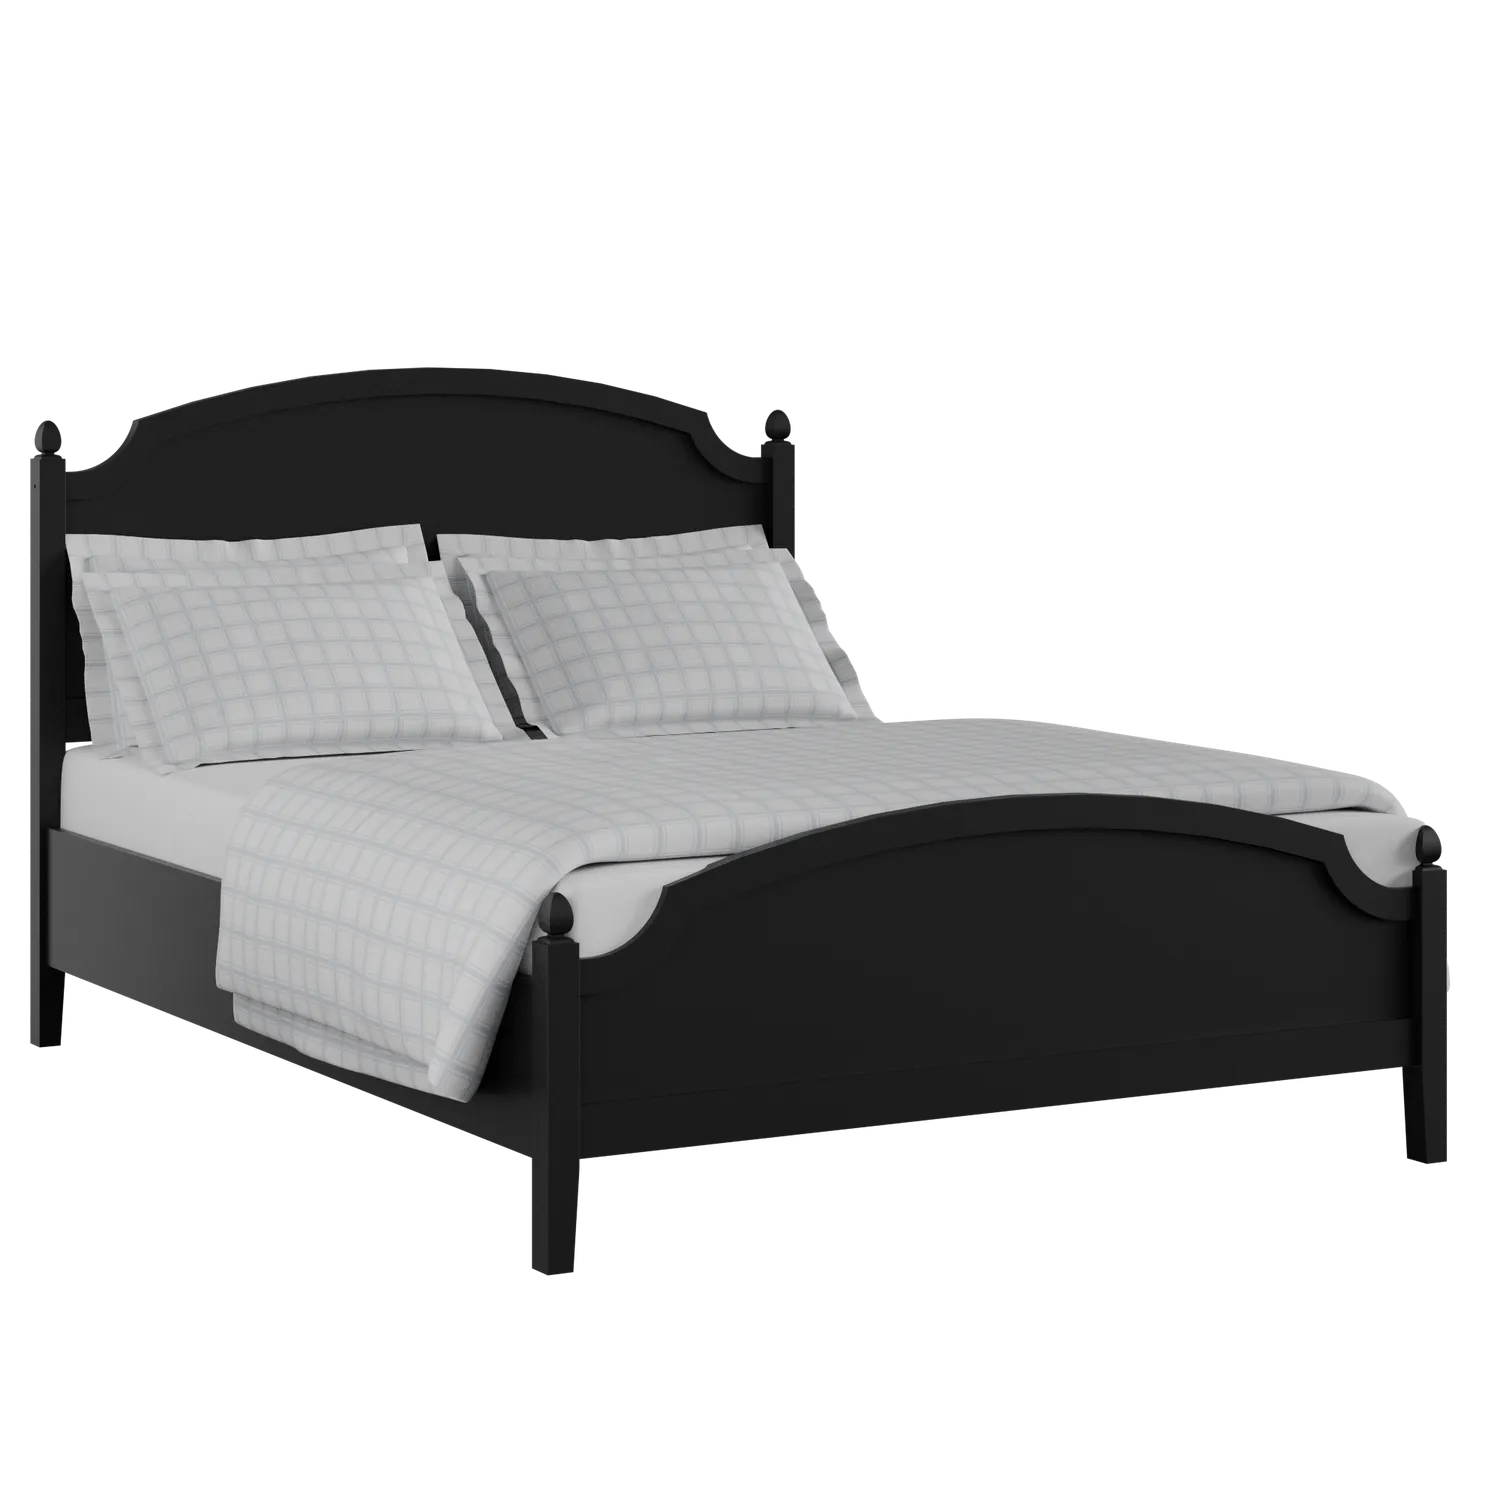 Kipling Low Footend Painted painted wood bed in black with Juno mattress